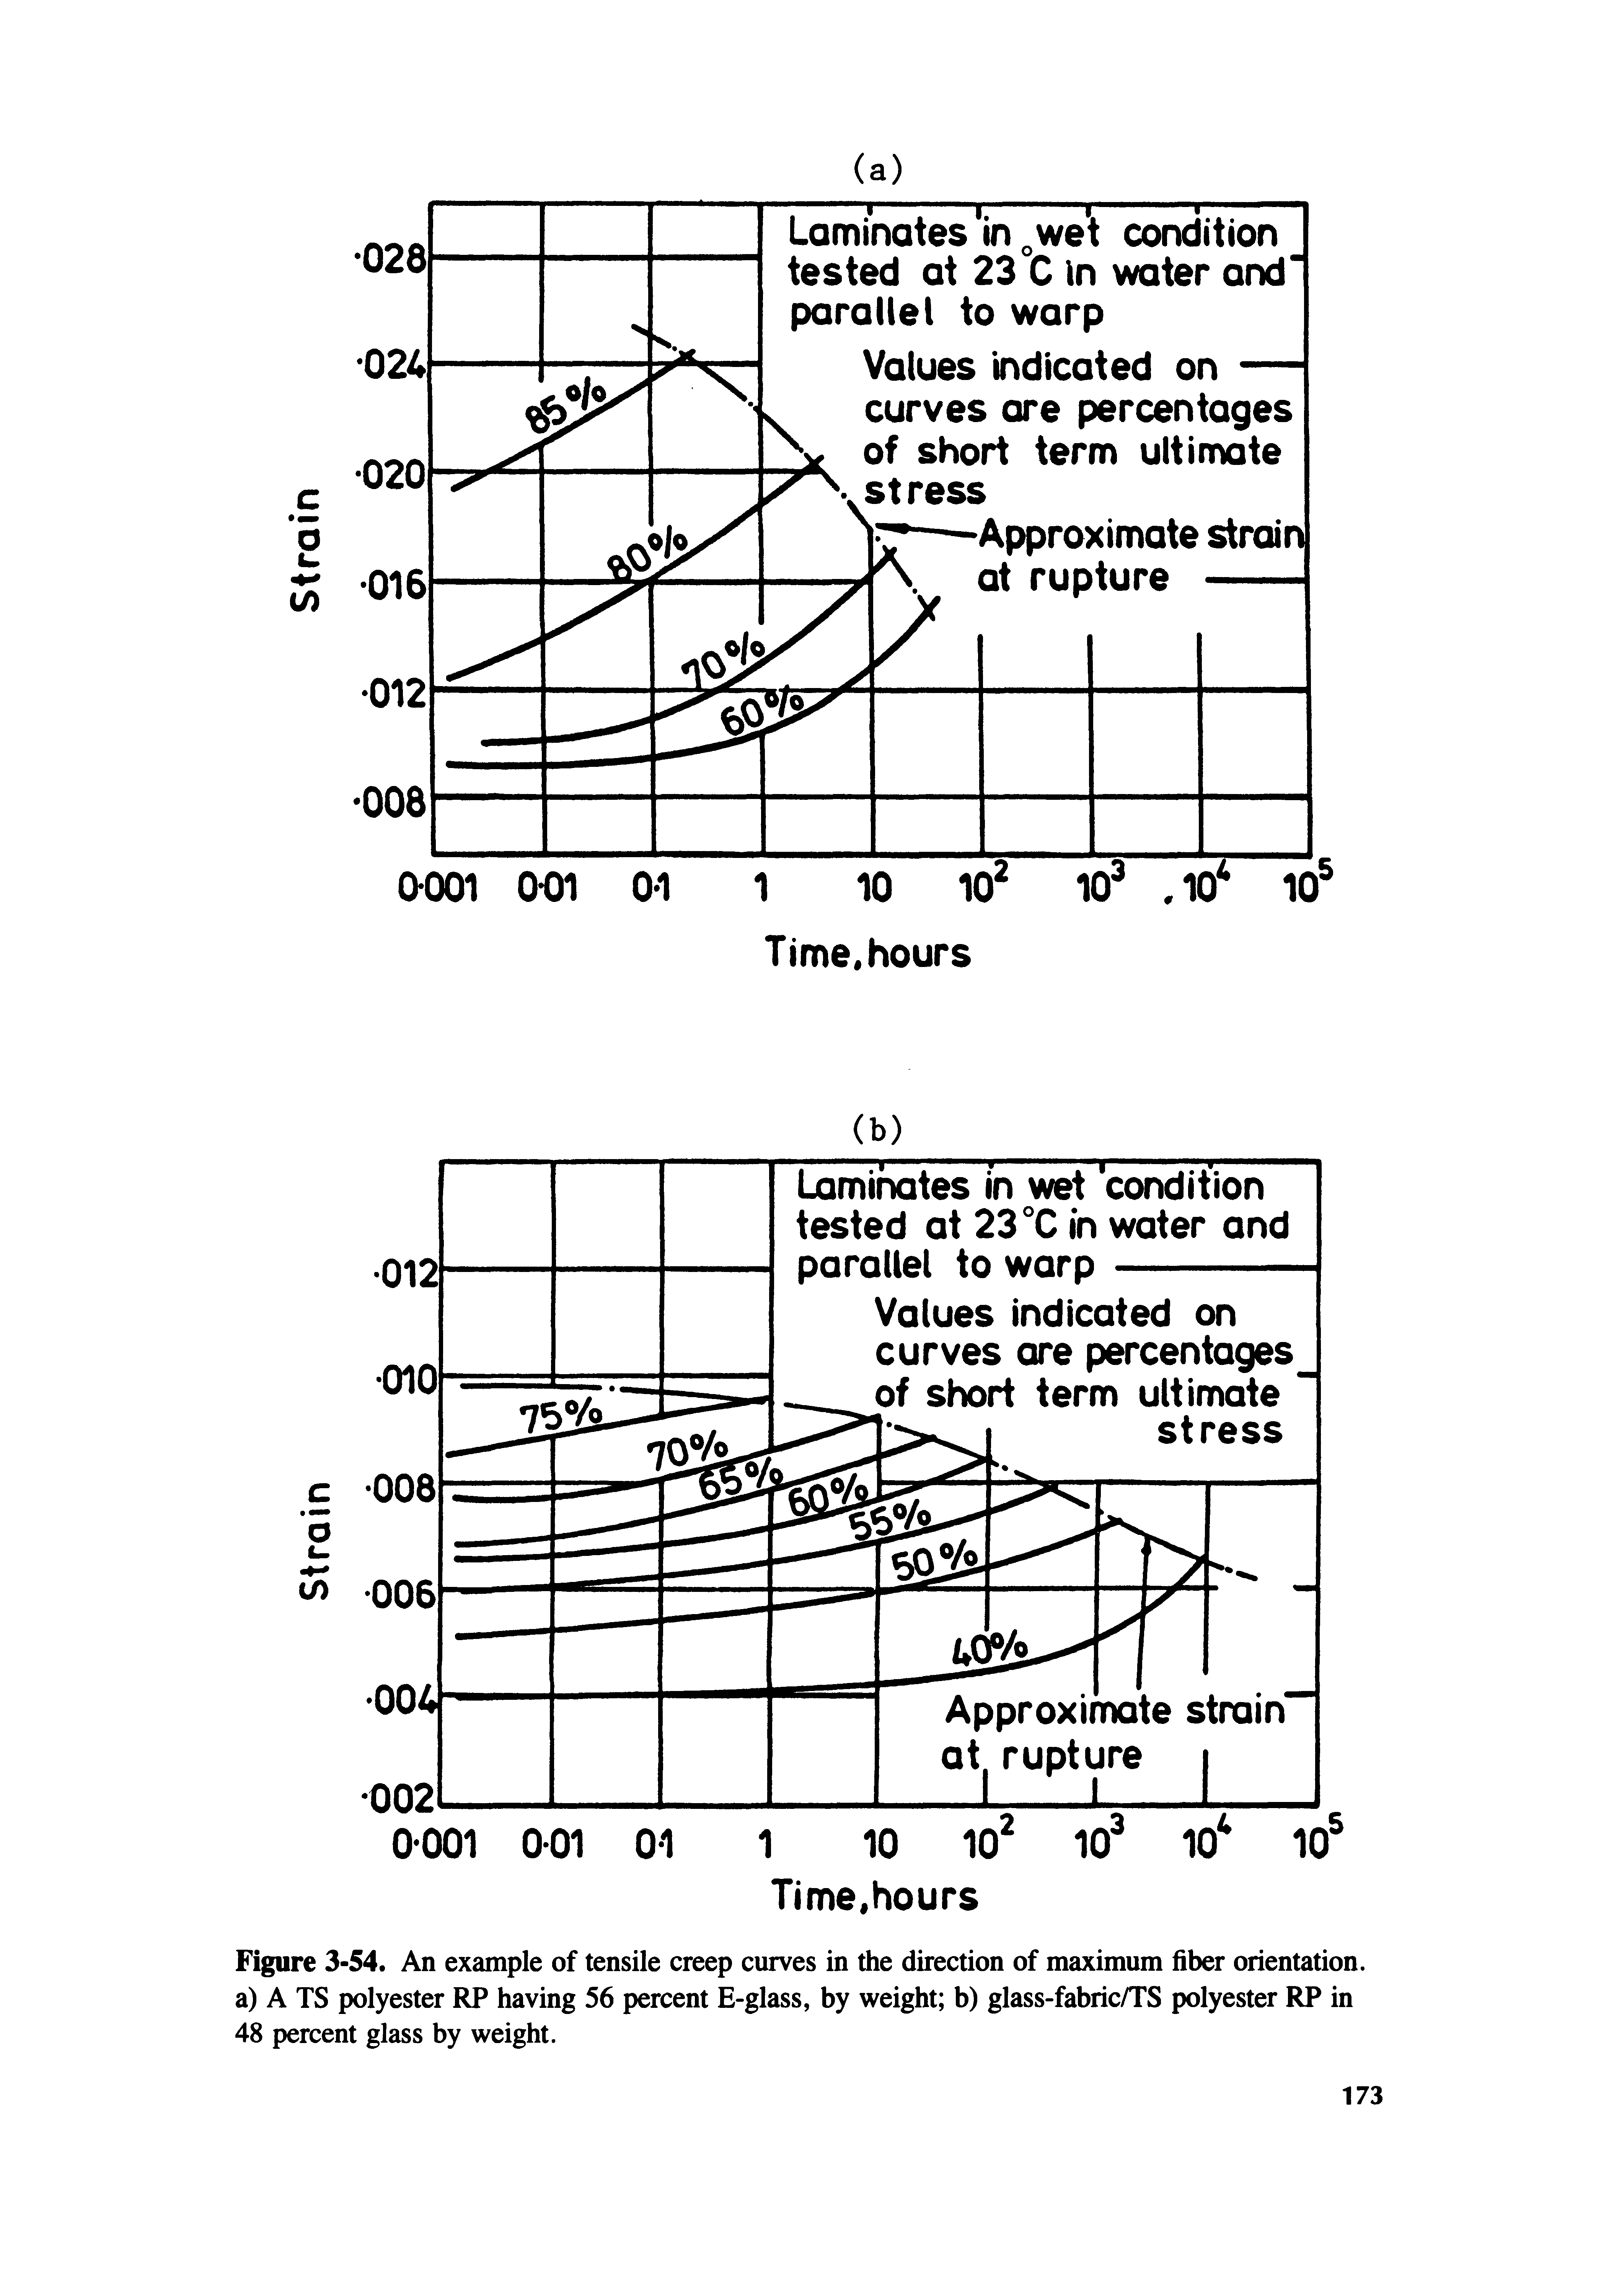 Figure 3-54. An example of tensile creep curves in the direction of maximum fiber orientation, a) A TS polyester RP having 56 percent E-glass, by weight b) glass-fabric/TS polyester RP in 48 percent glass by weight.